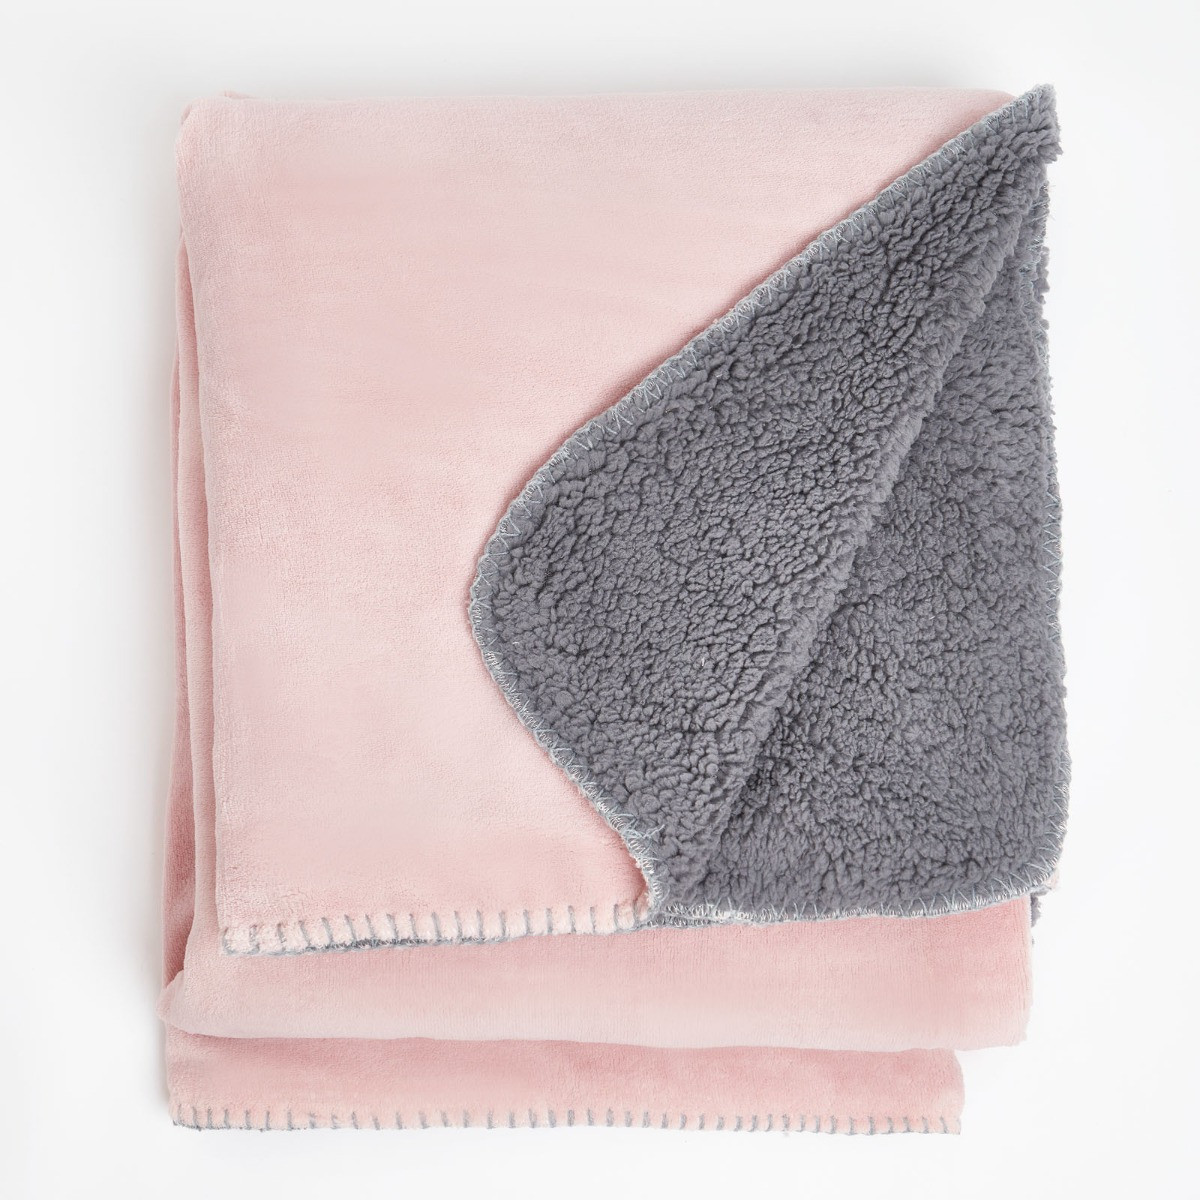 Brentfords by OHS Sherpa Throw Blanket, Grey/Blush - 59 x 71 inches>